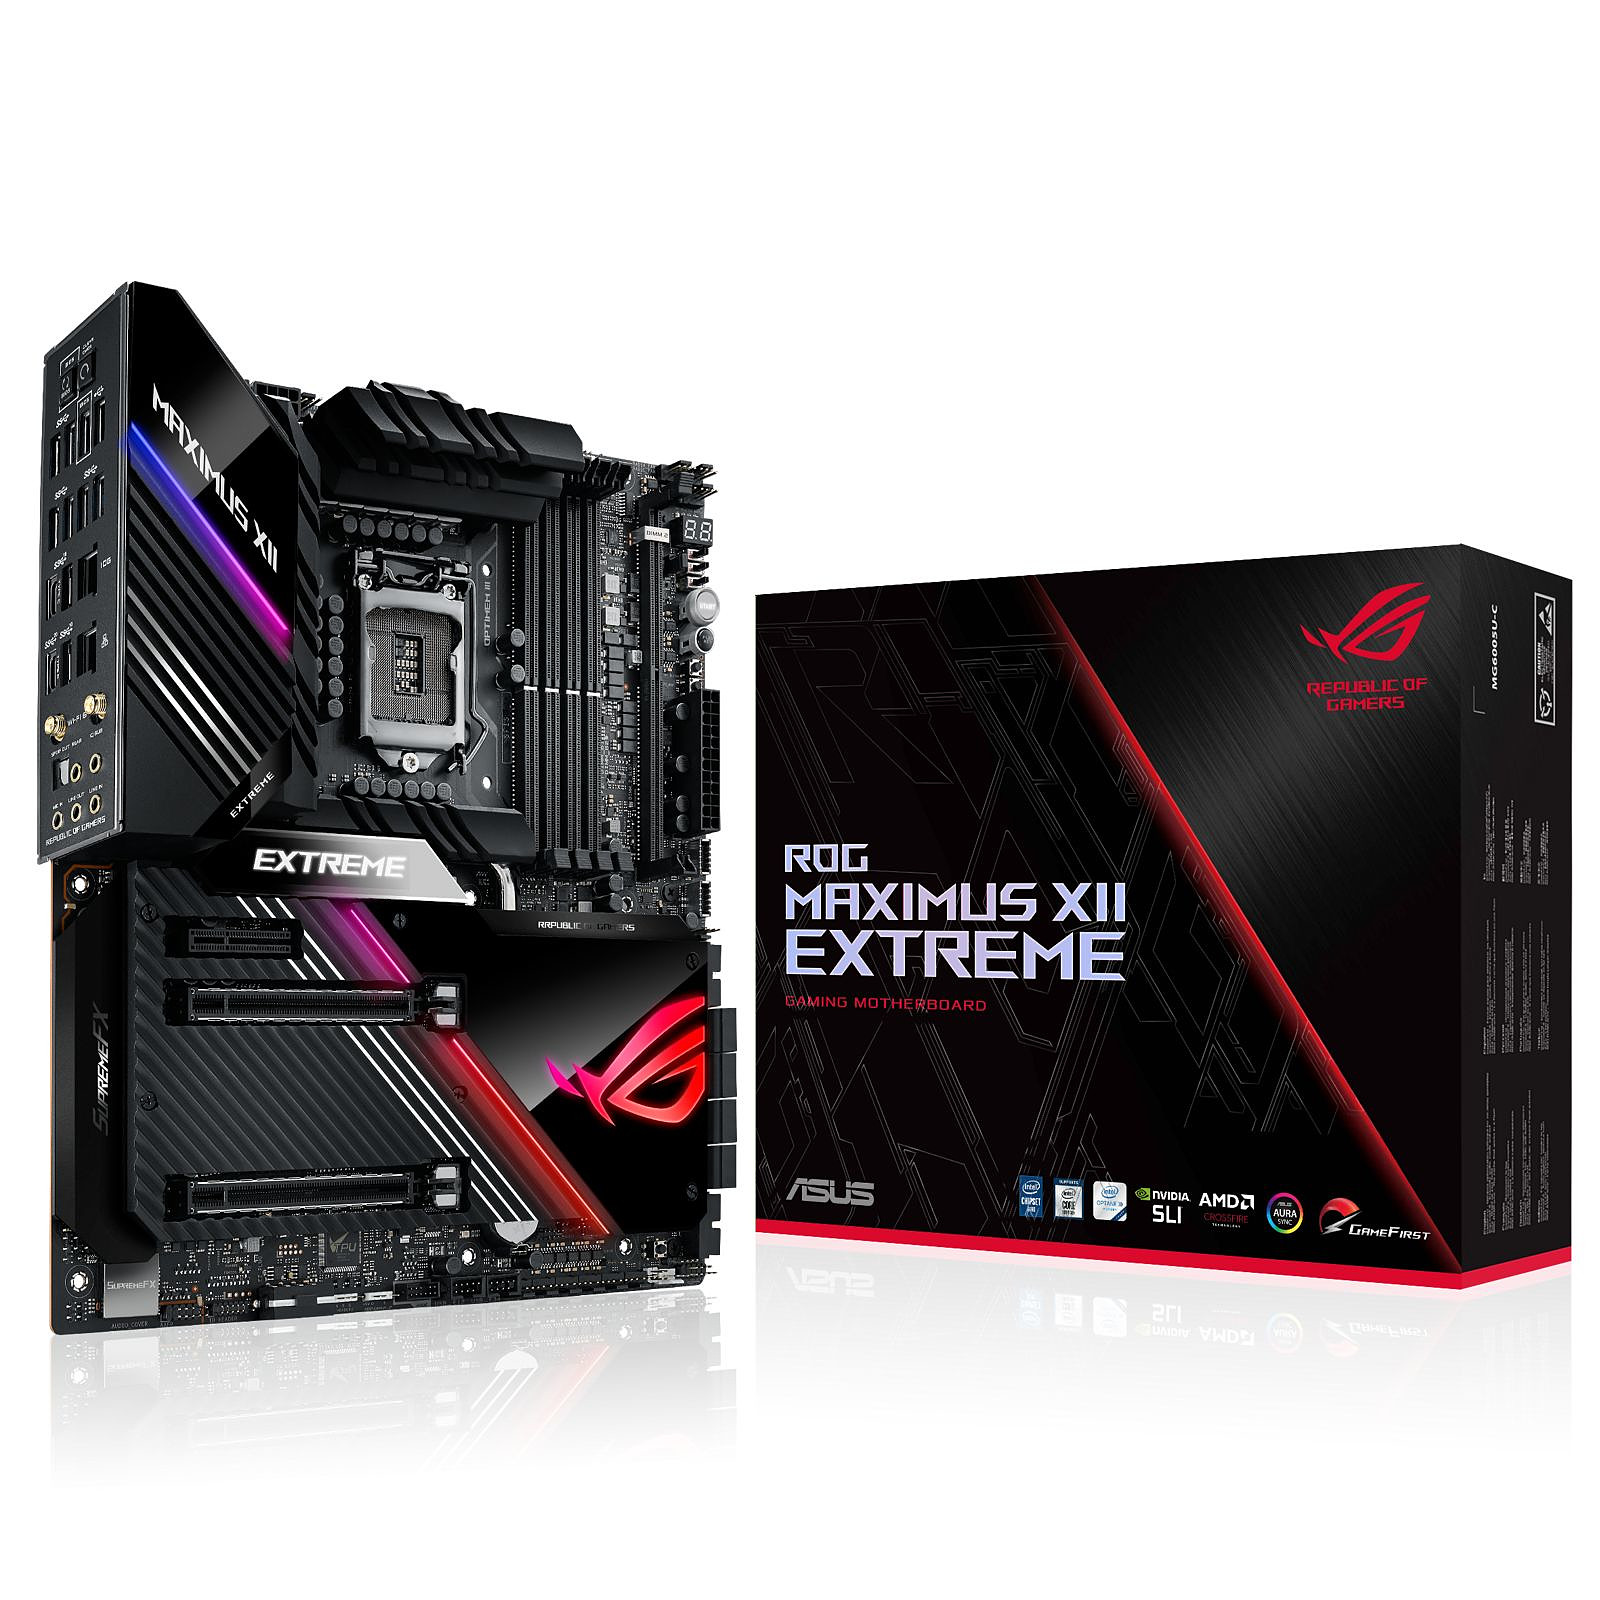 ASUS ROG MAXIMUS XII EXTREME · Occasion - Carte mère ASUS - Occasion